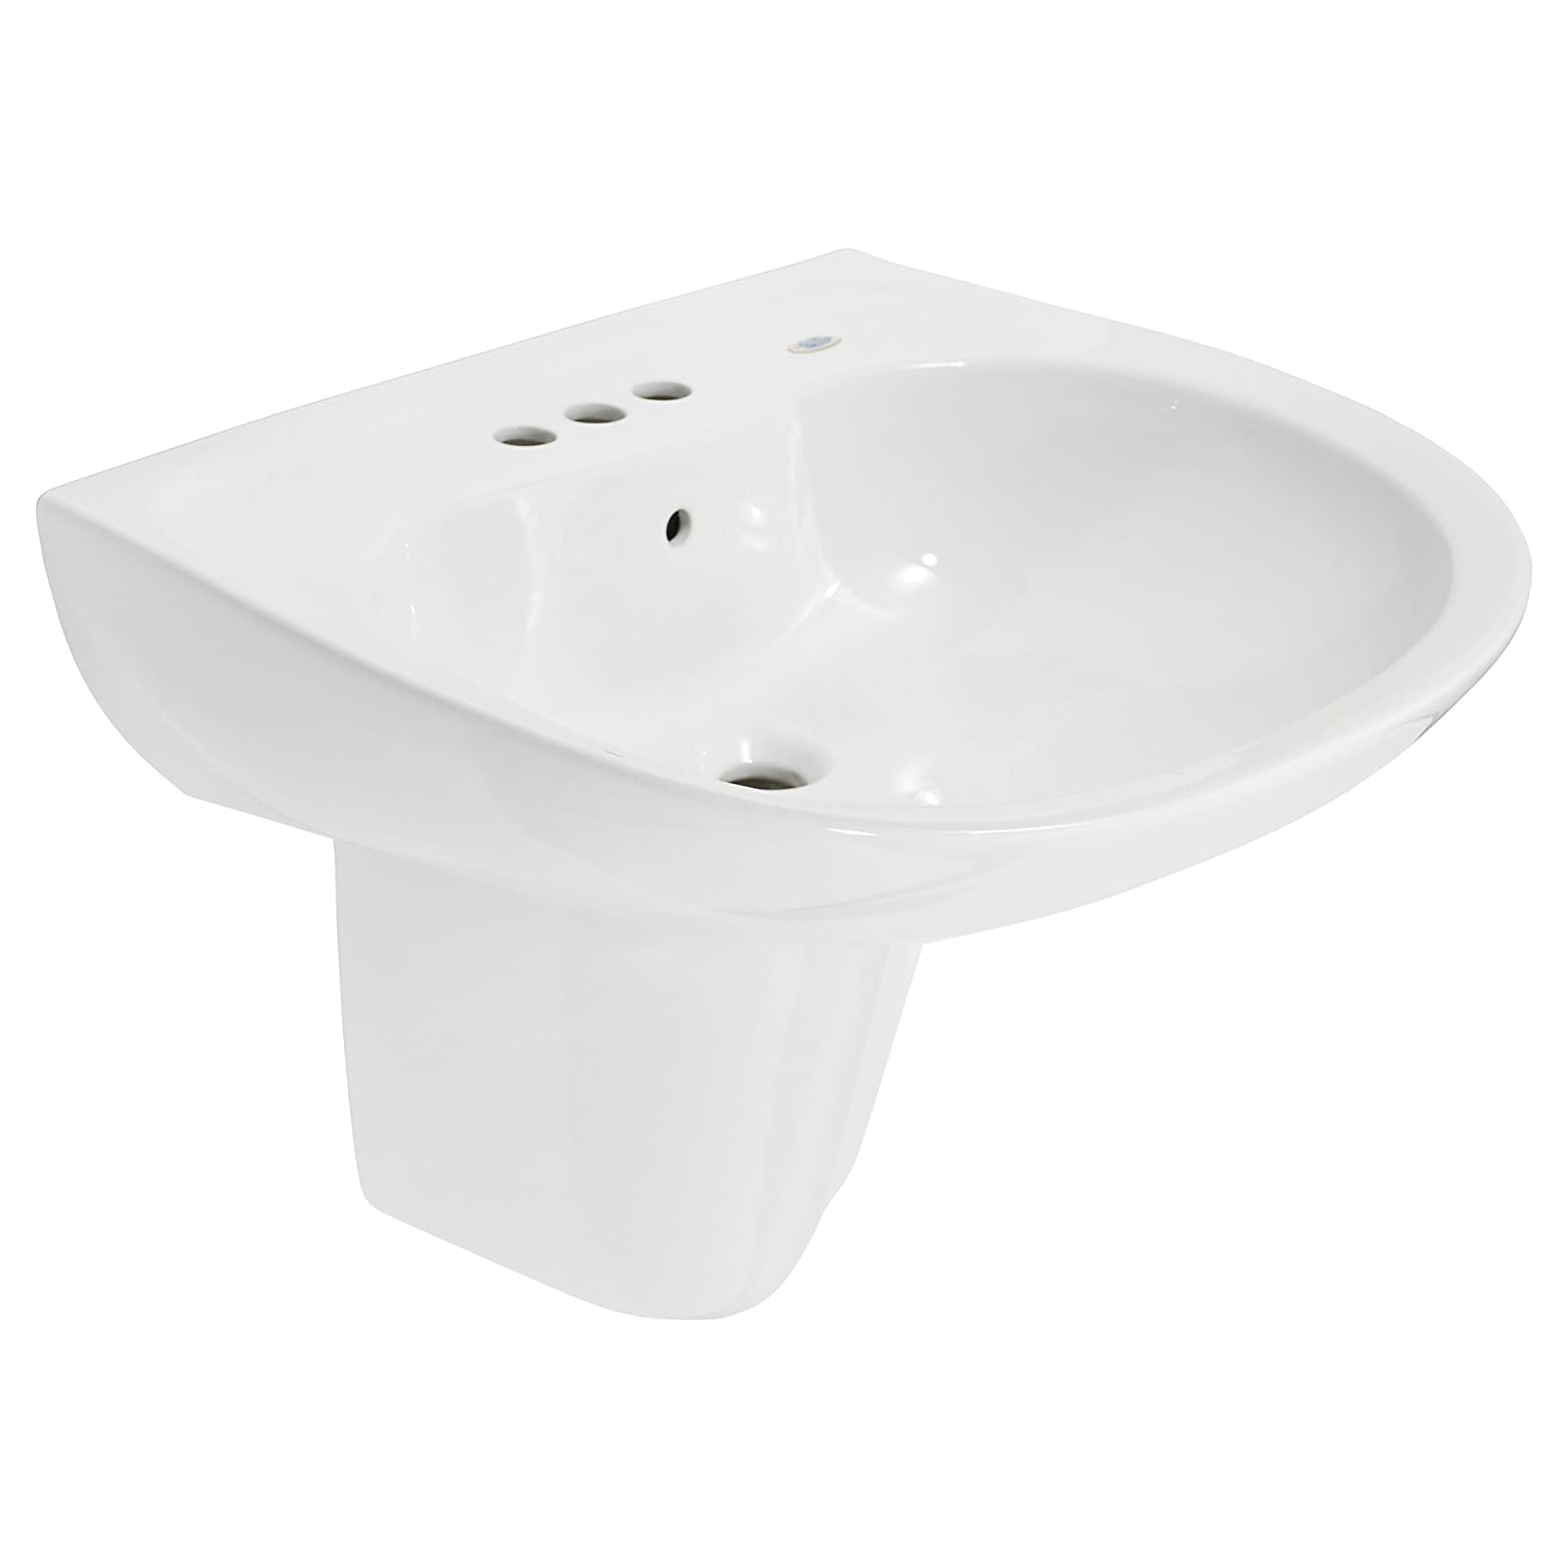 Prominence 26x21"Wall Mount Lav Sink in Cotton White w/8" Fct Holes